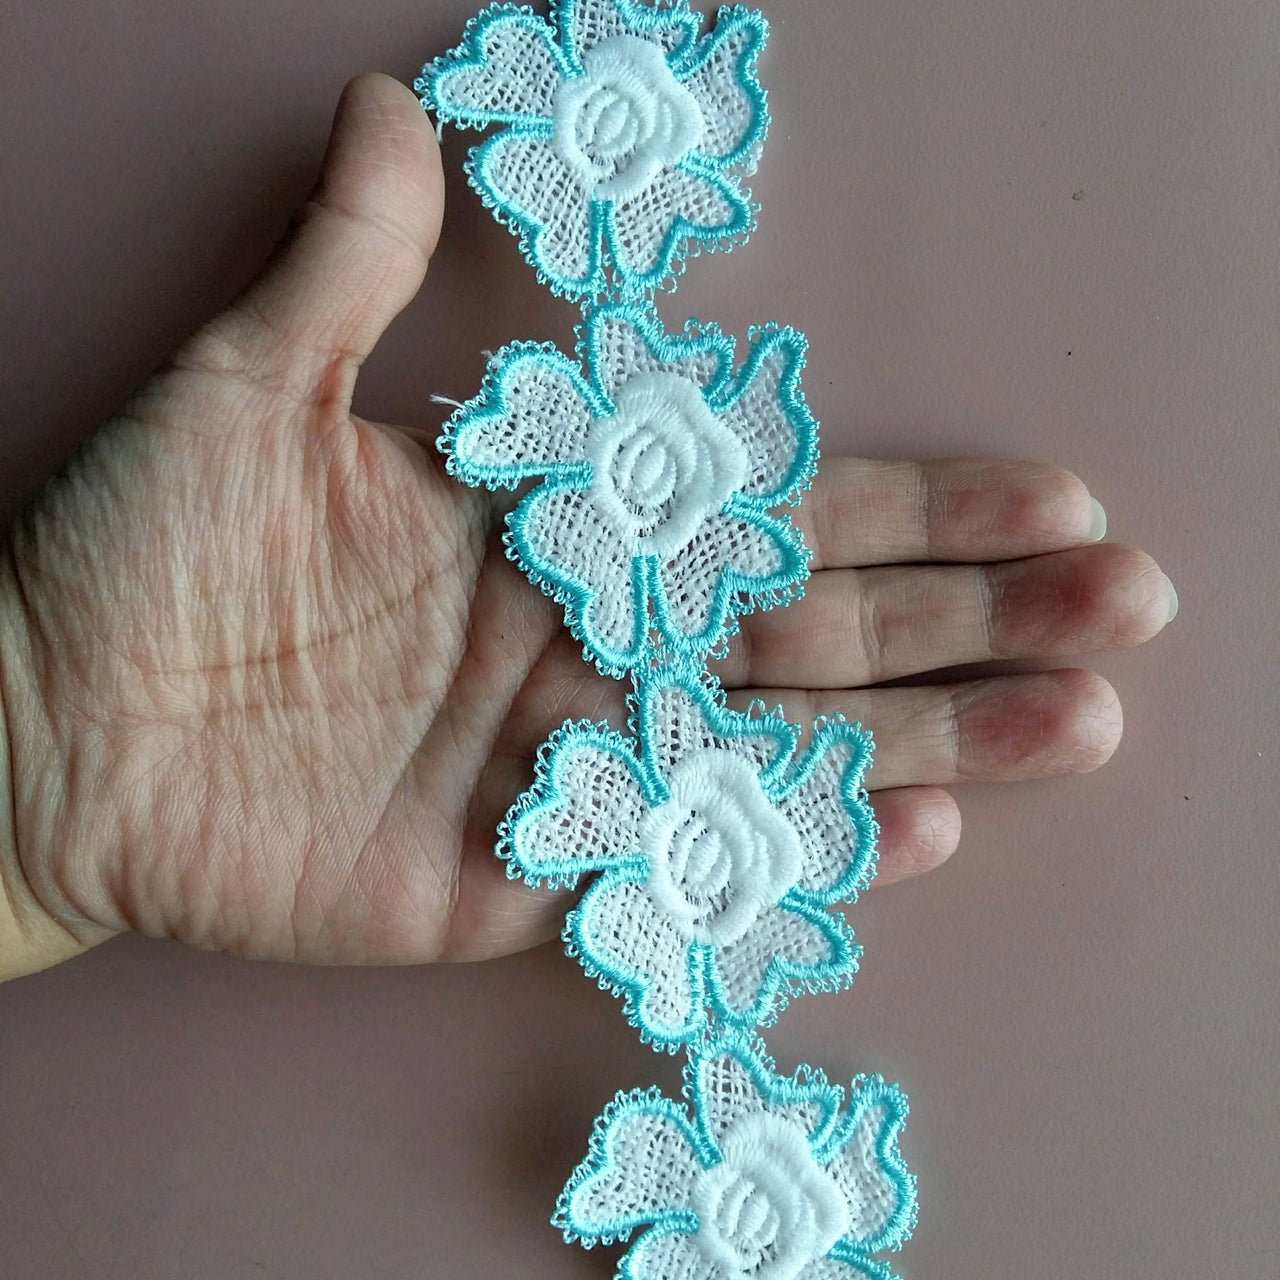 Yellow / Pink / Blue And White Floral Embroidery Lace Trim. Approx. 55mm Wide - 200317L142/43/44